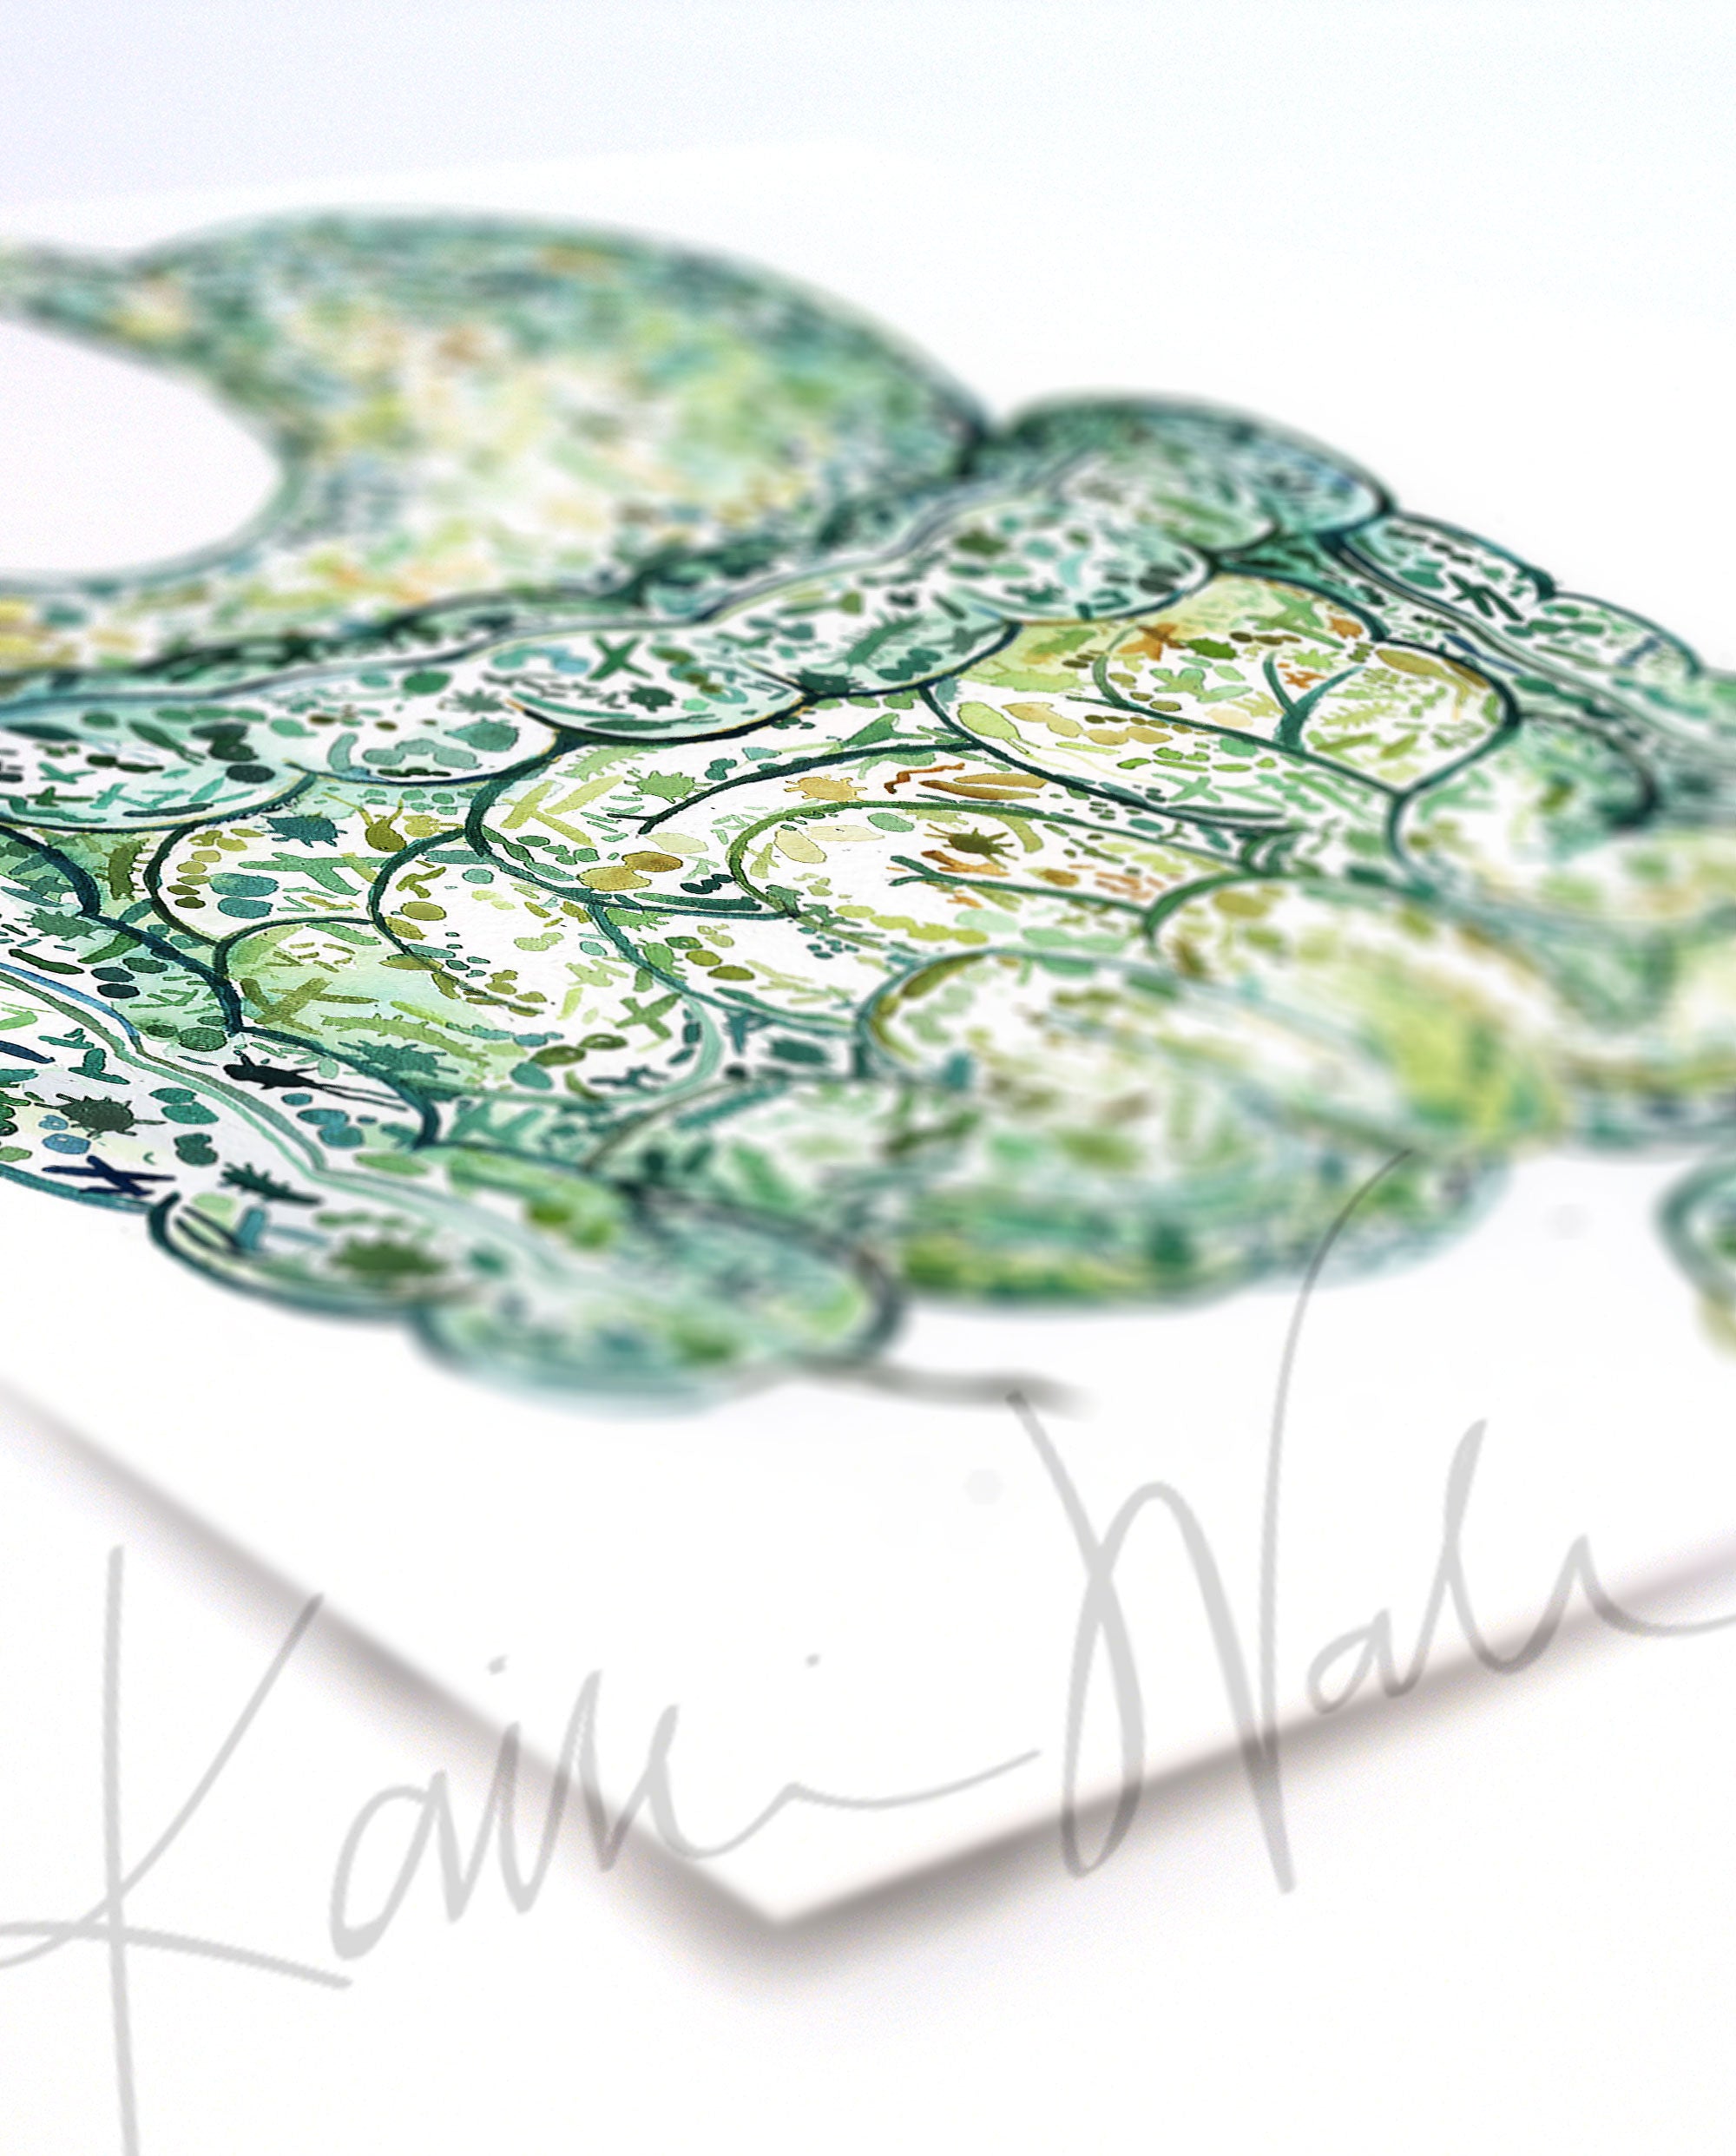 Angled view of a watercolor painting of the stomach and intestines showing the internal gut microbiome.